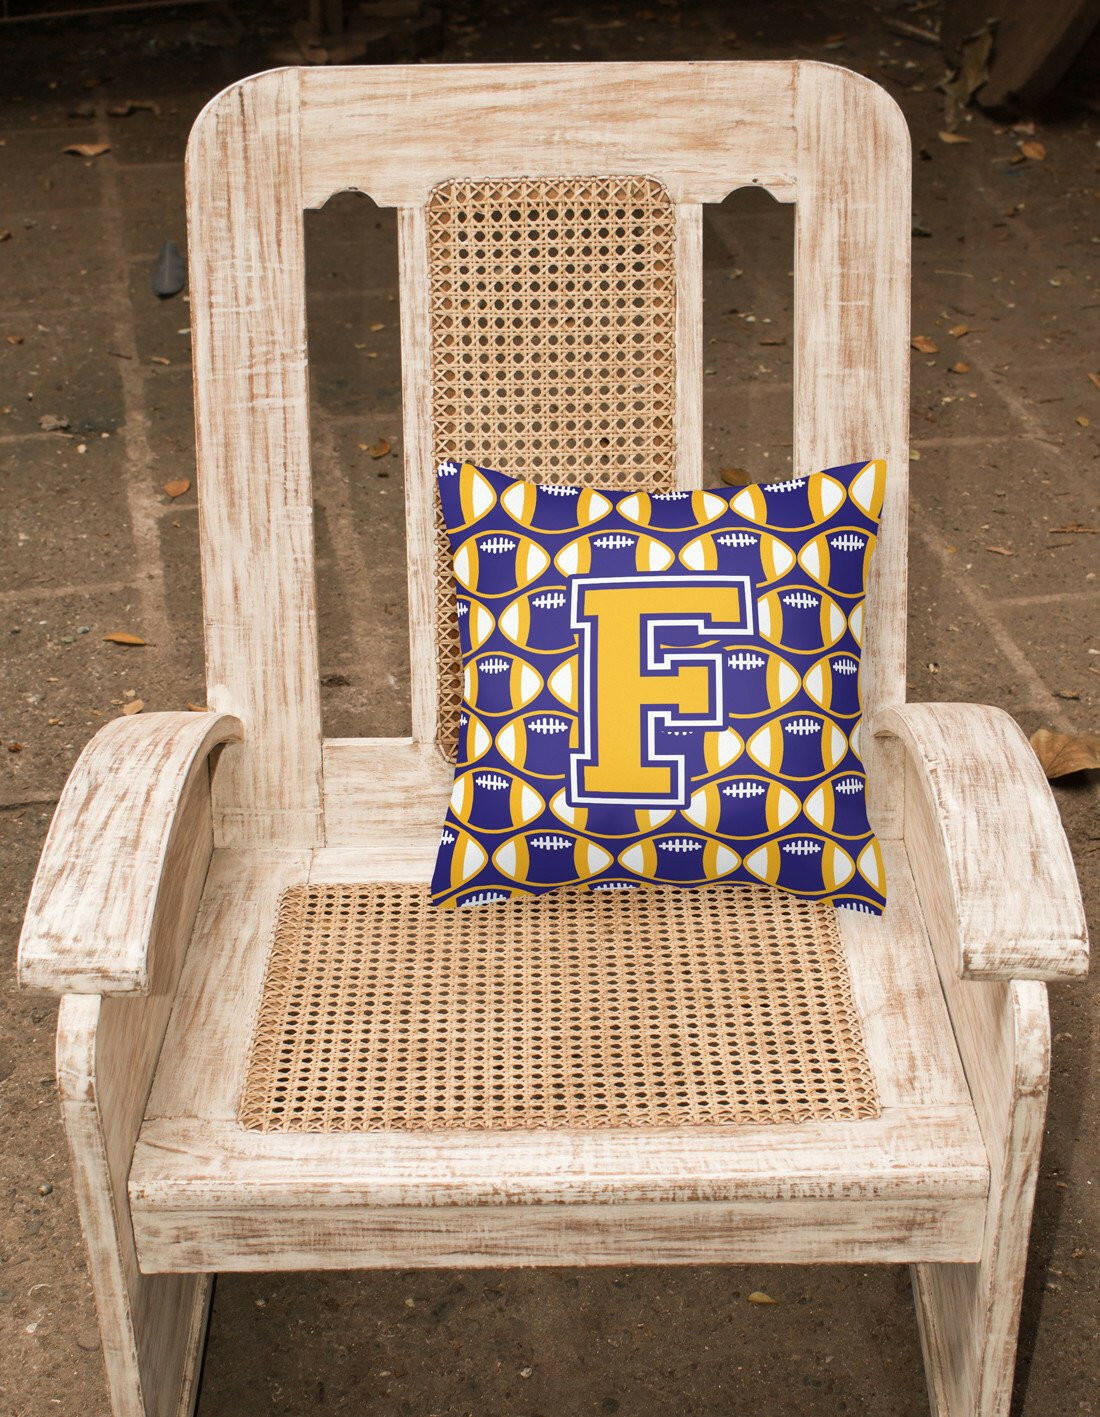 Letter F Football Purple and Gold Fabric Decorative Pillow CJ1064-FPW1414 by Caroline's Treasures